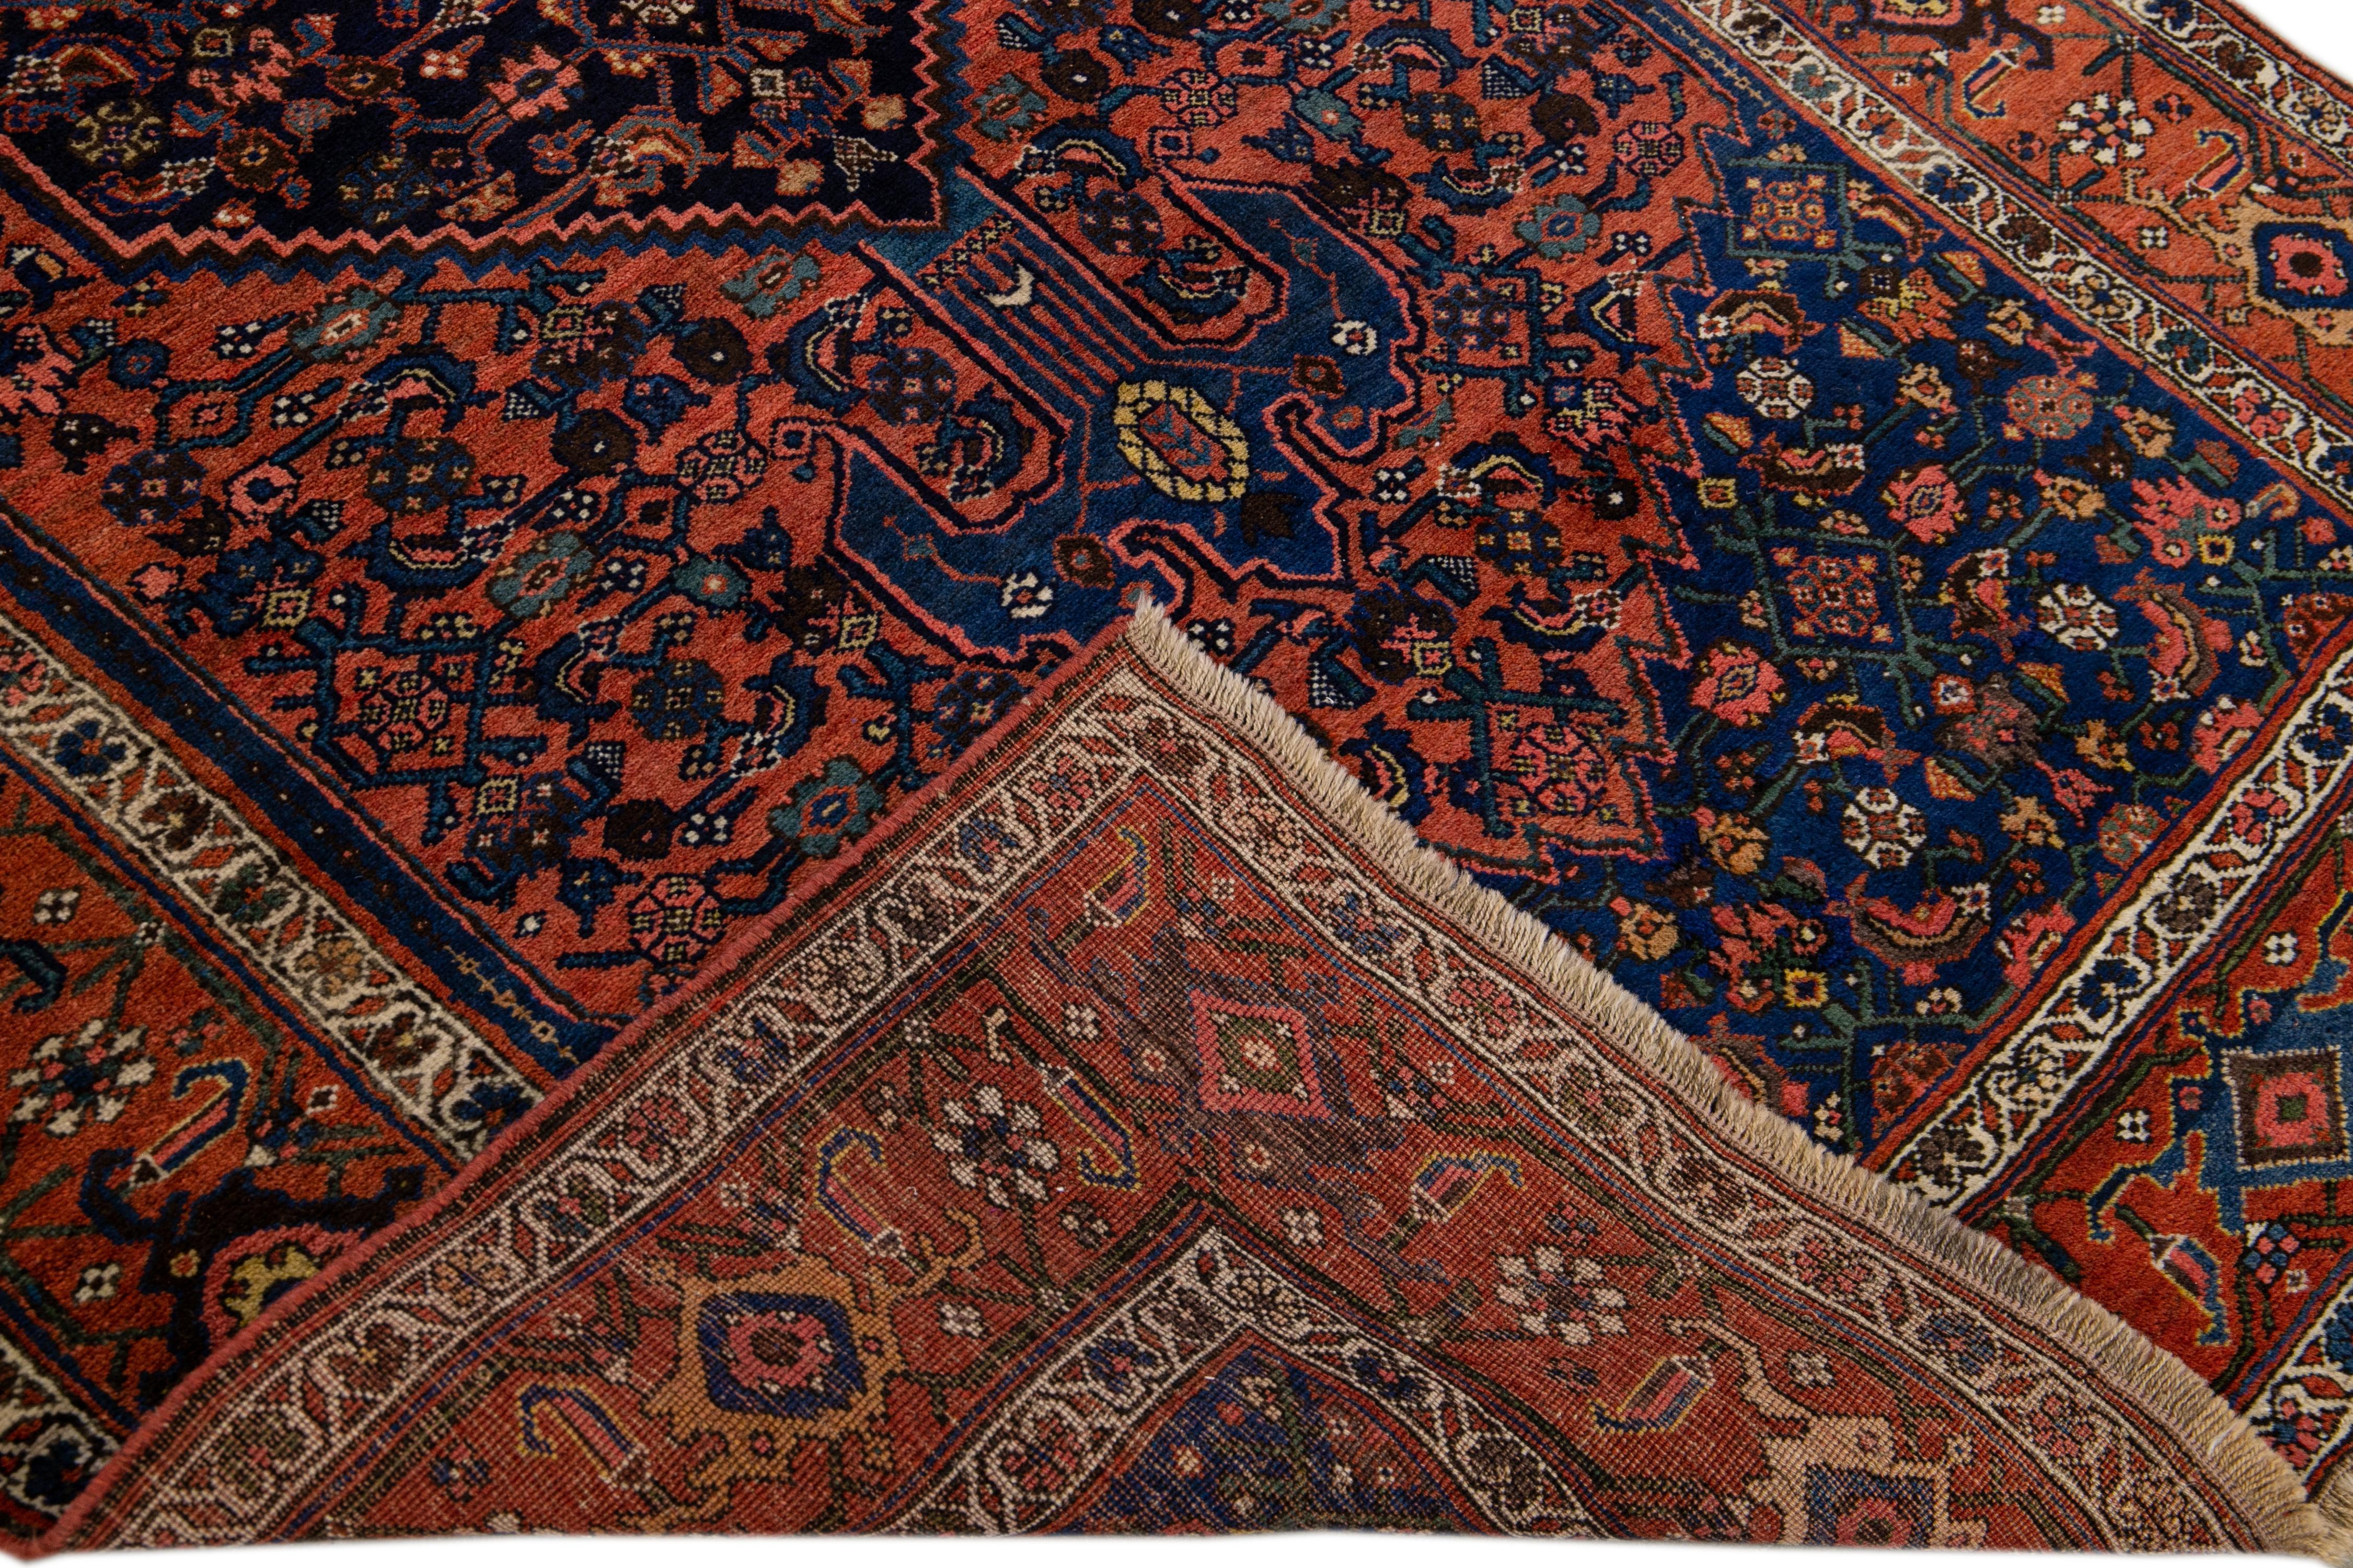 Beautiful Vintage Persian Bidjar hand-knotted wool rug with rust and a blue field. This Piece has a multicolor accents medallion floral design.

This rug measures 4'8